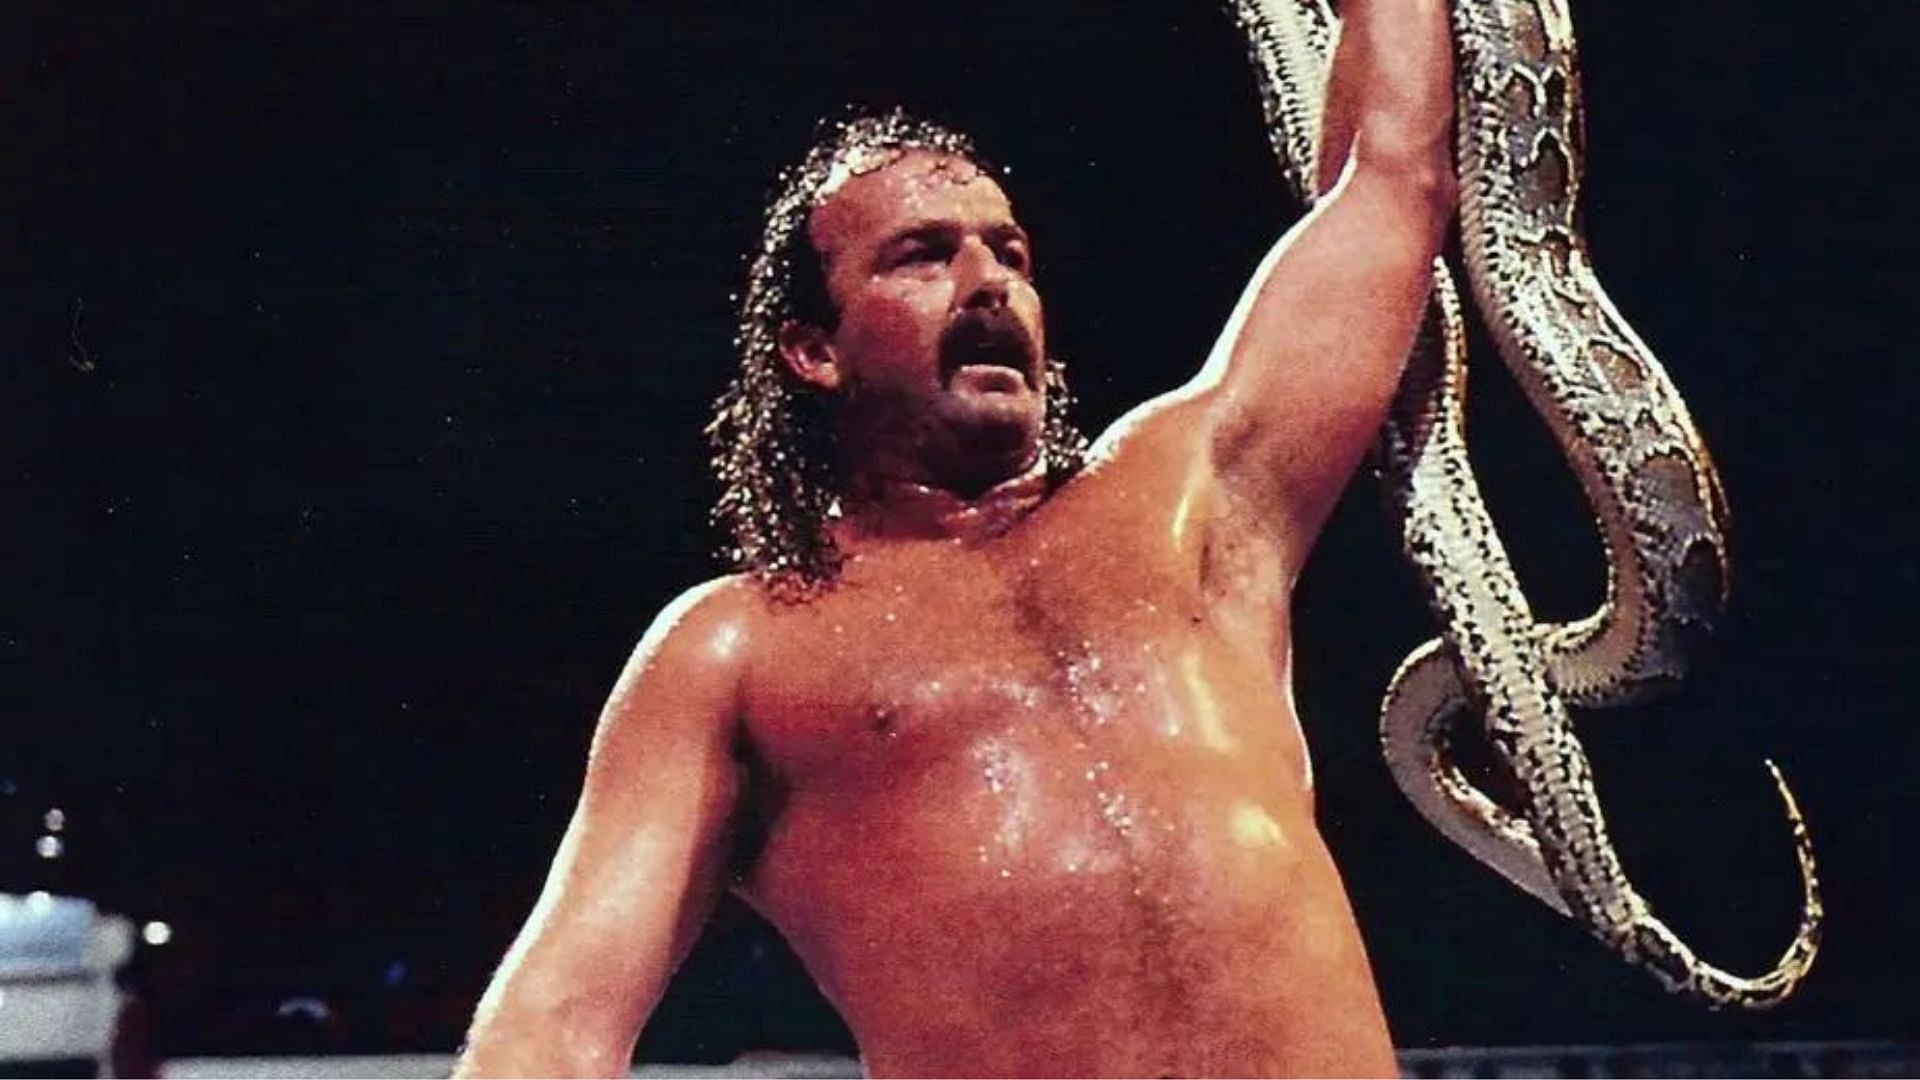 Jake Roberts with his snake Damien